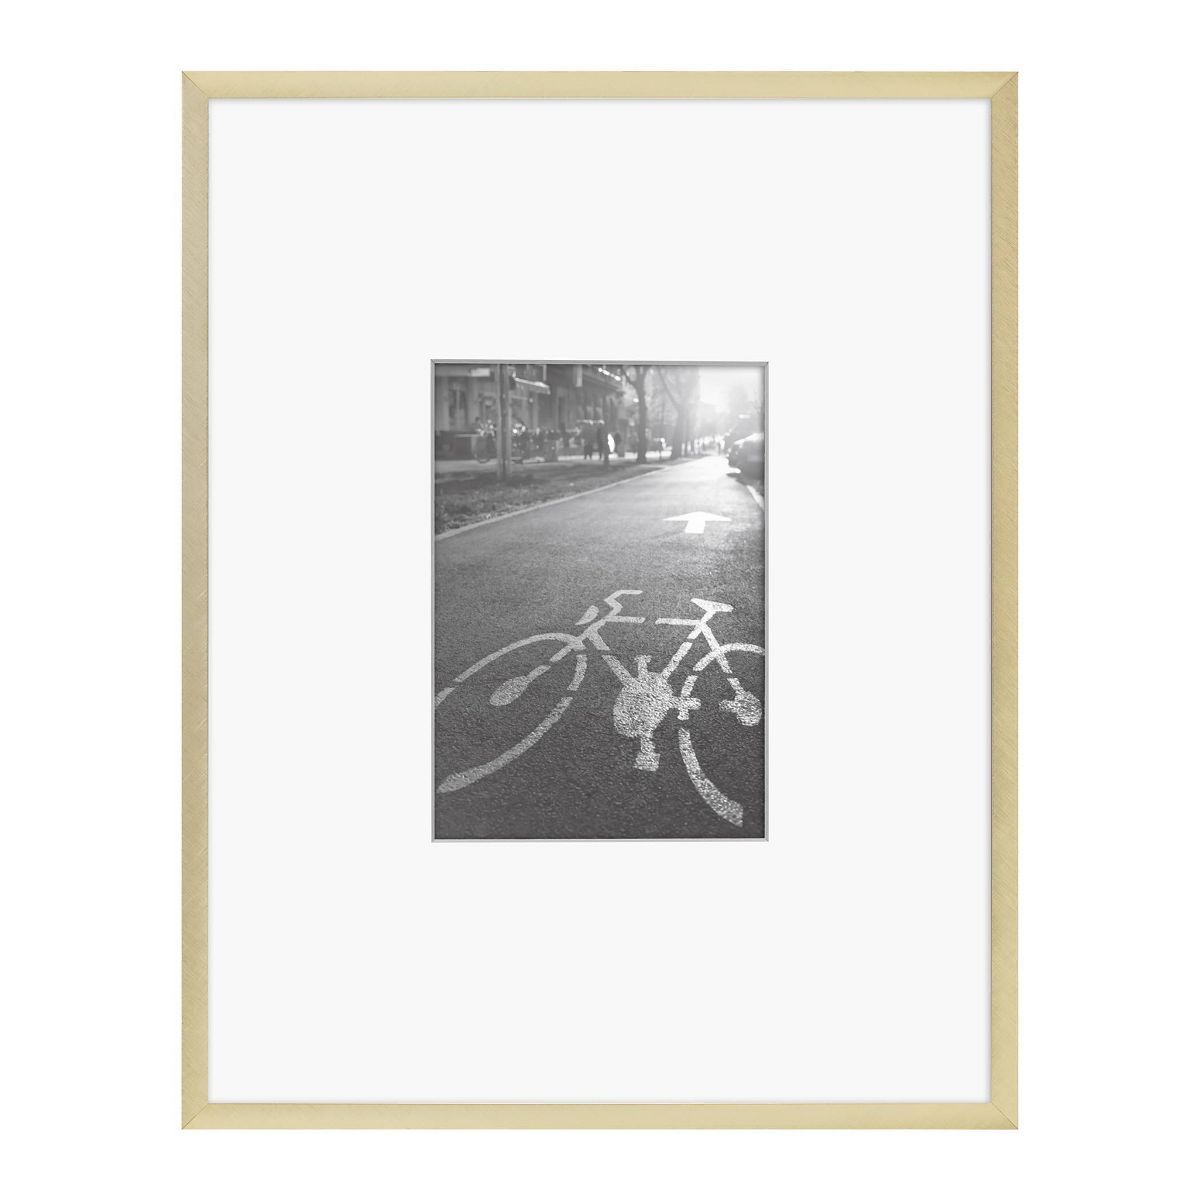 11.3" x 14.4" Matted to 5" x 7" Thin Metal Gallery Frame Brass - Threshold™ | Target